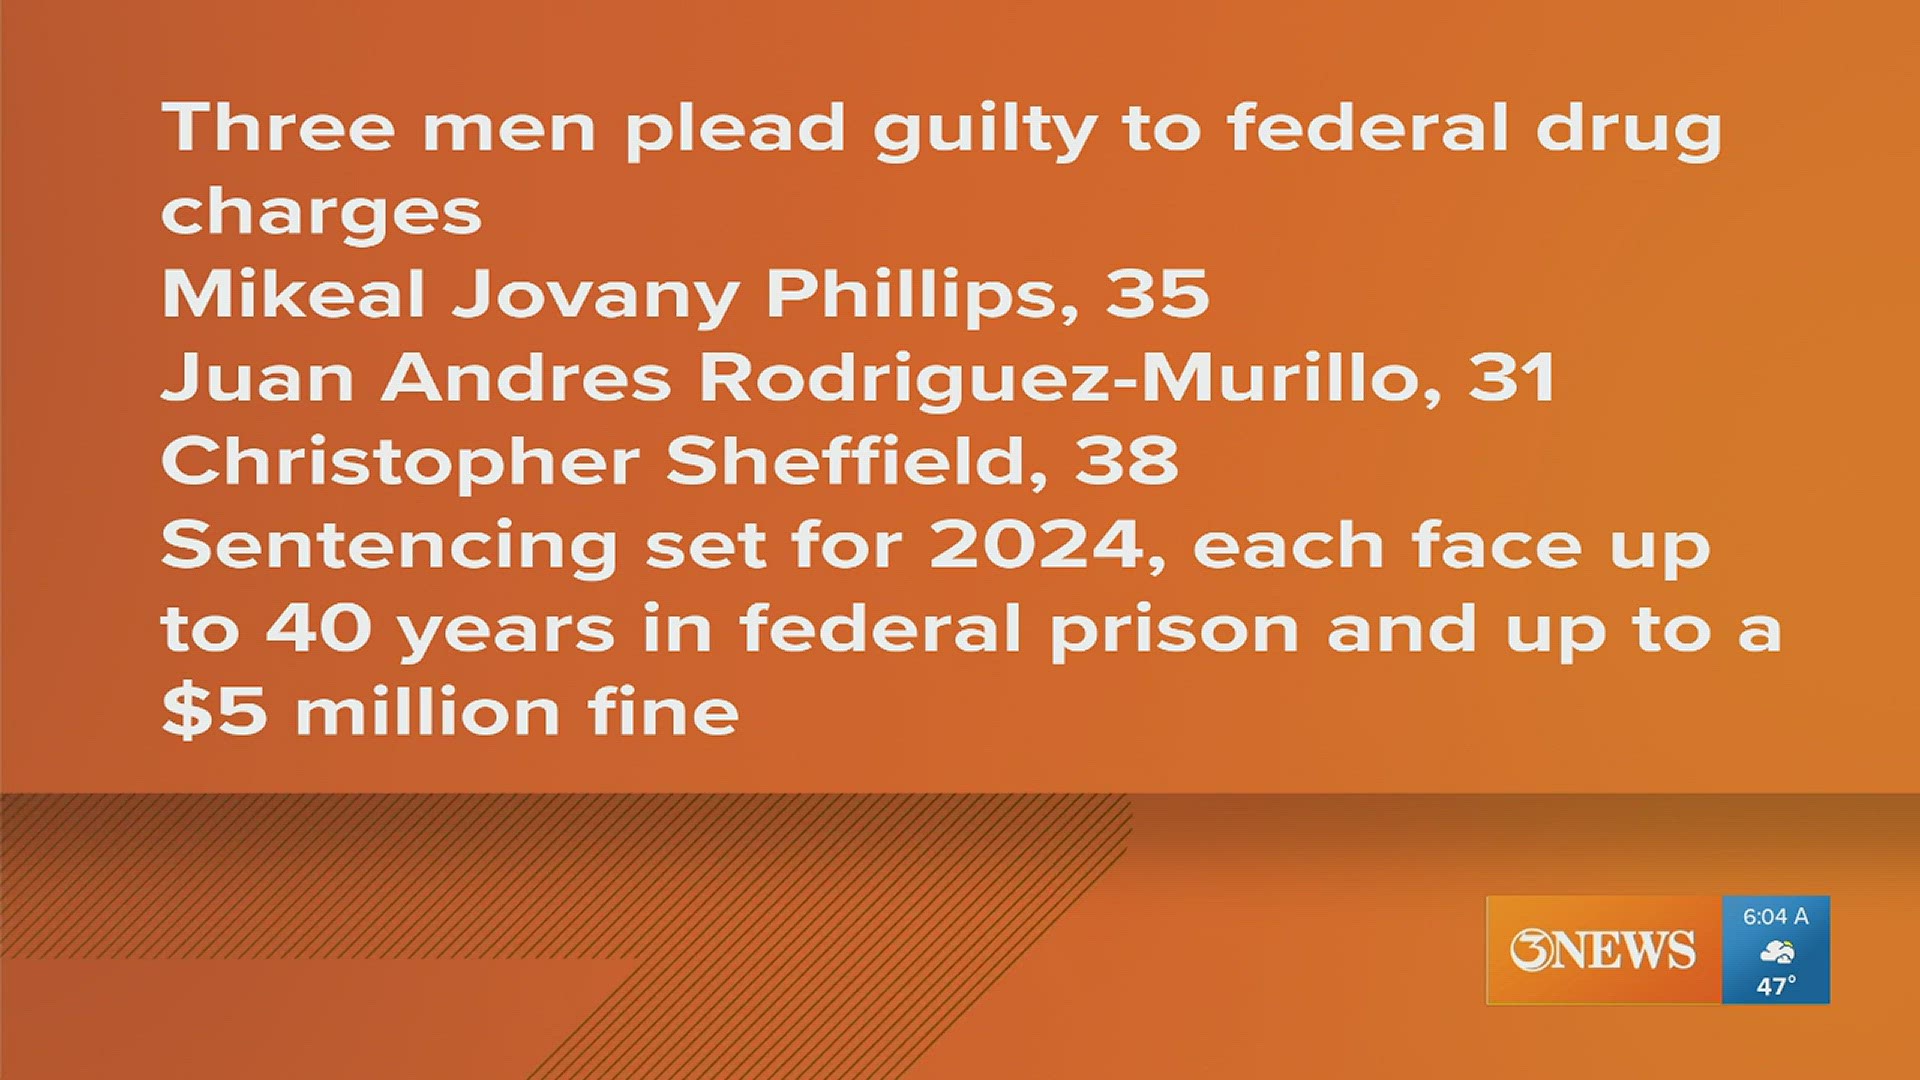 All three face up to 40 years in federal prison and a $ 5 million fine.